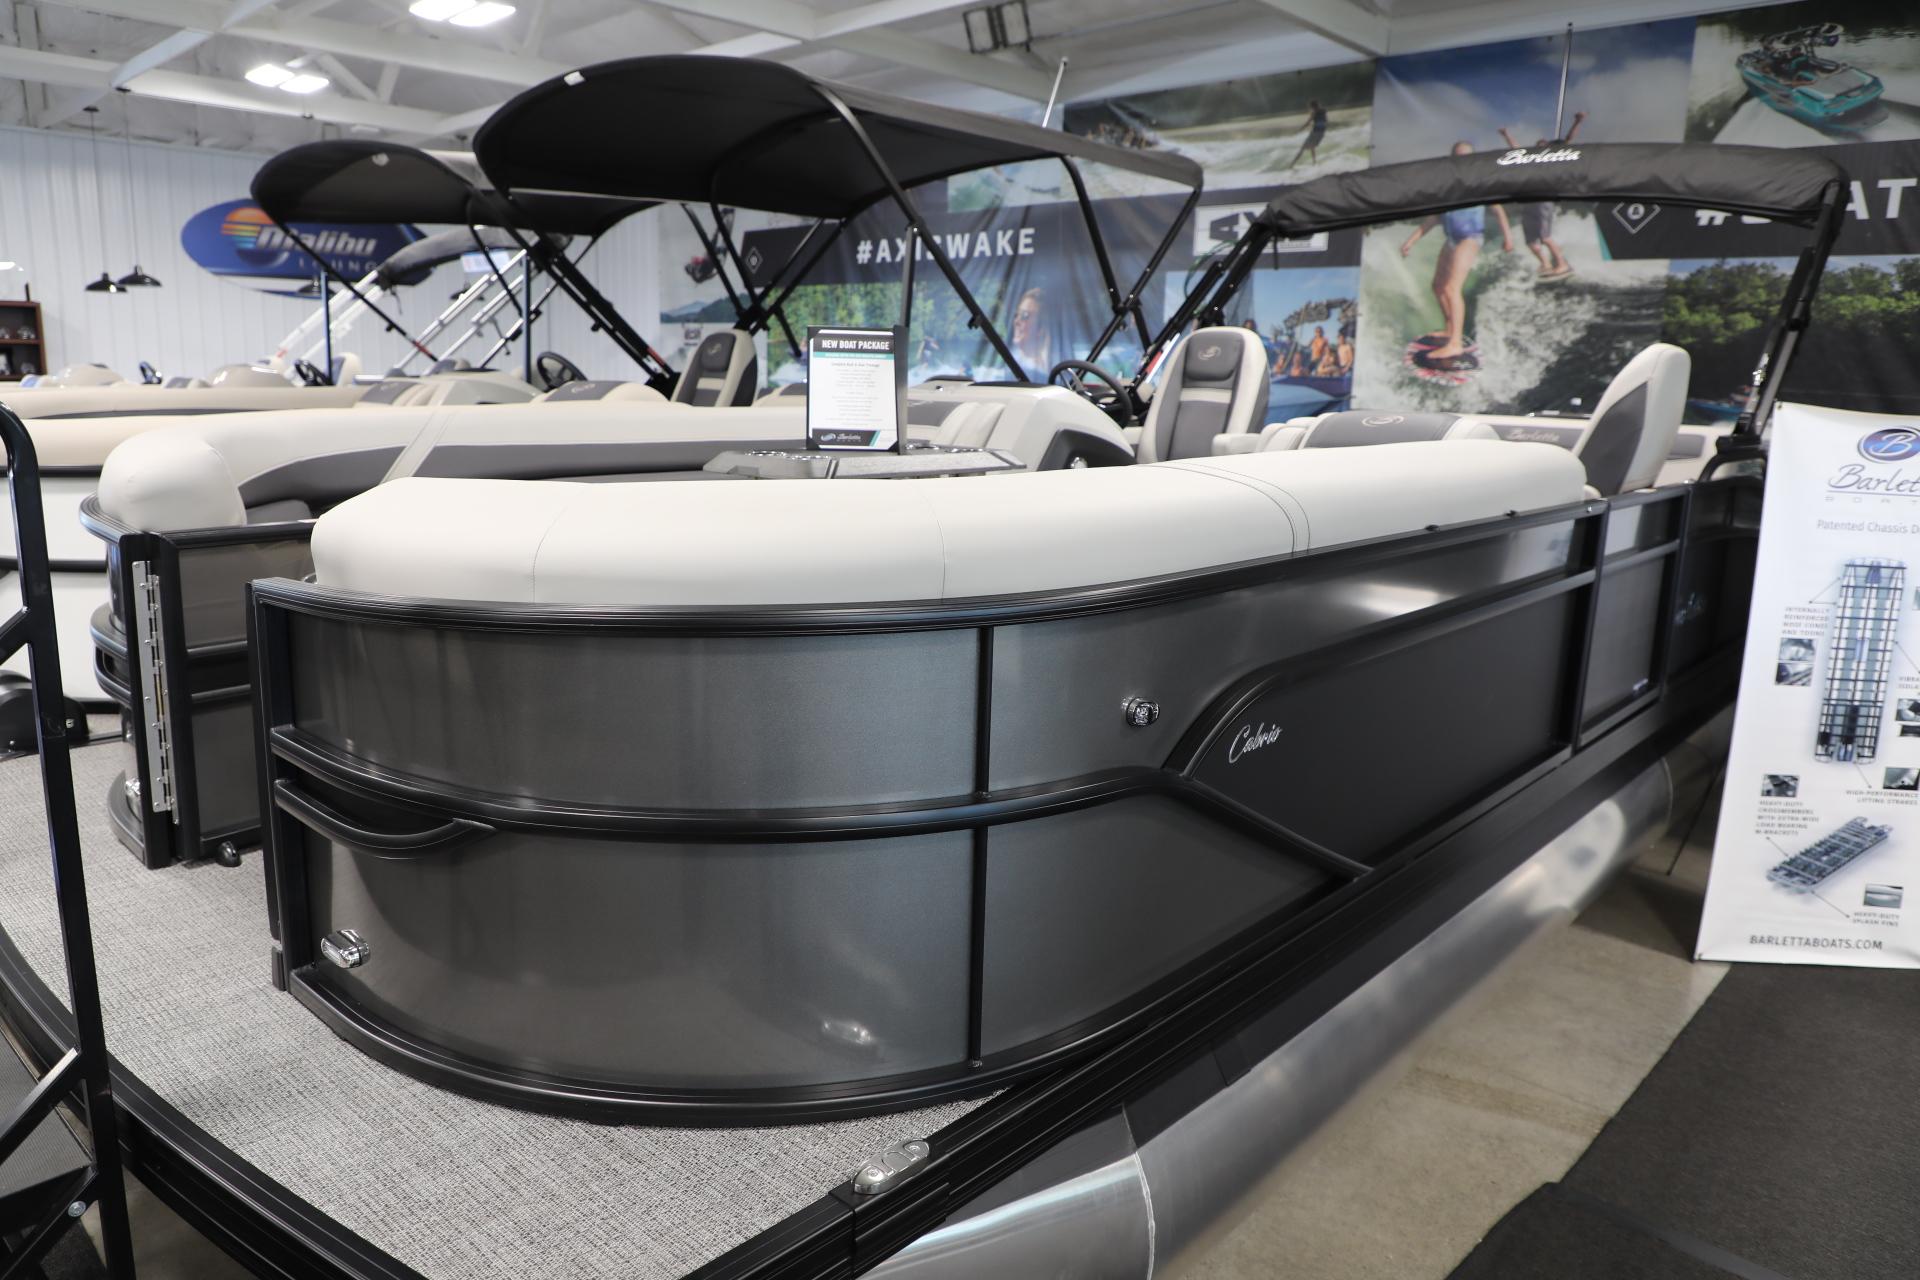 Pontoon boats for sale in Idaho - Boat Trader